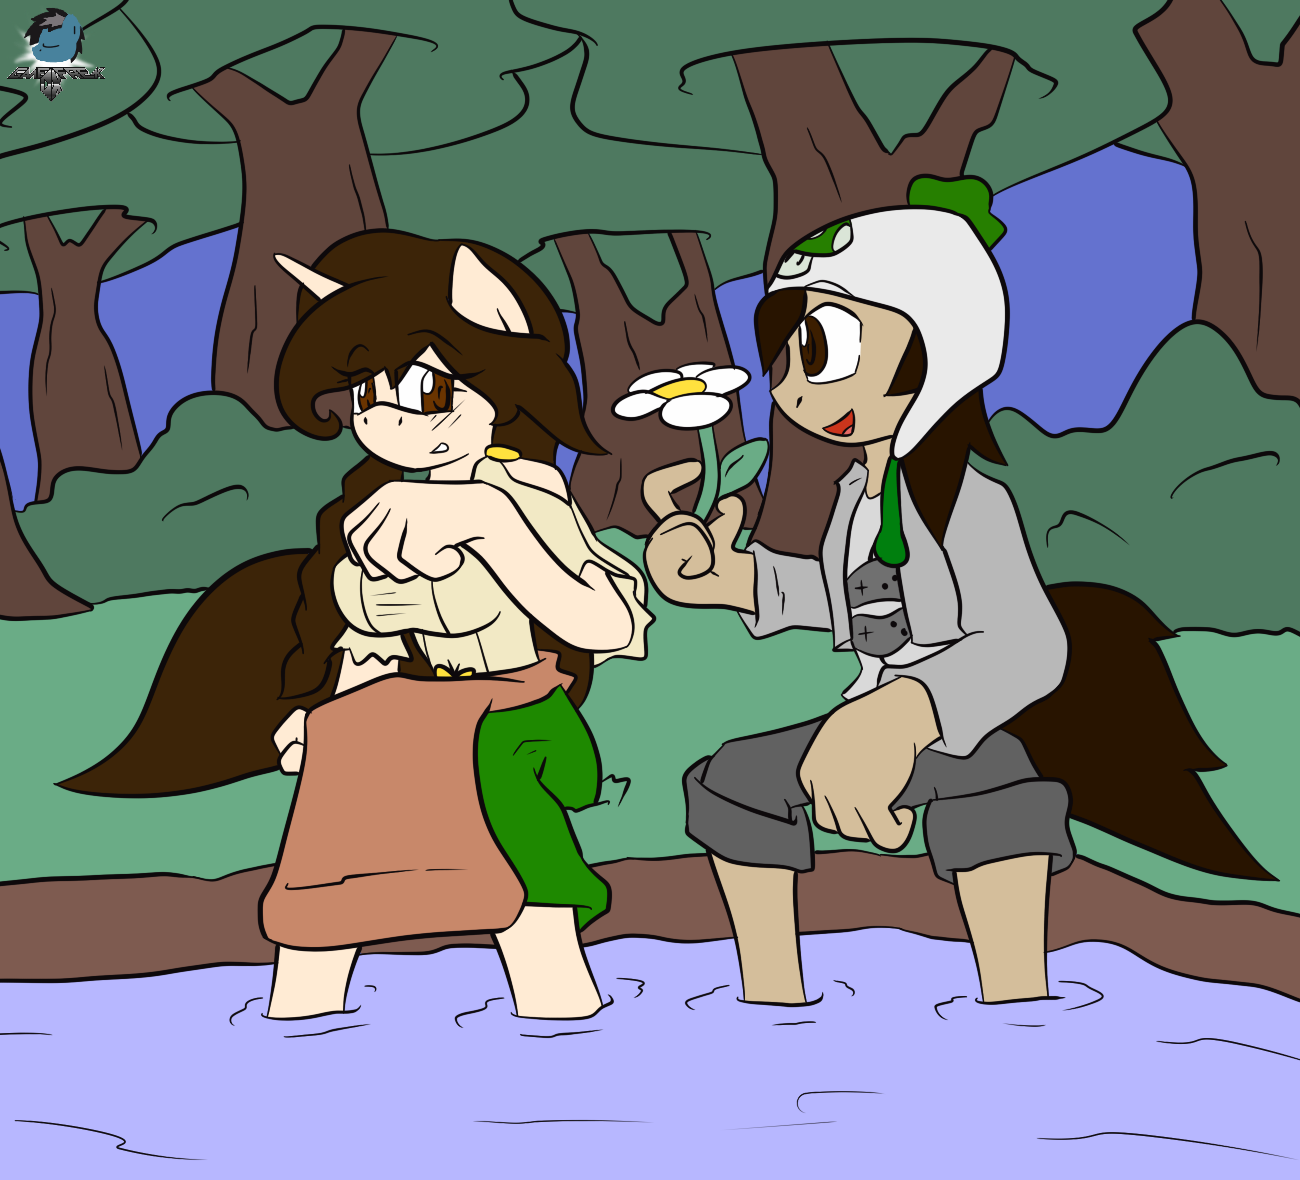 _commission__at_the_lake_by_gamefreakdx-d7v55rq.png